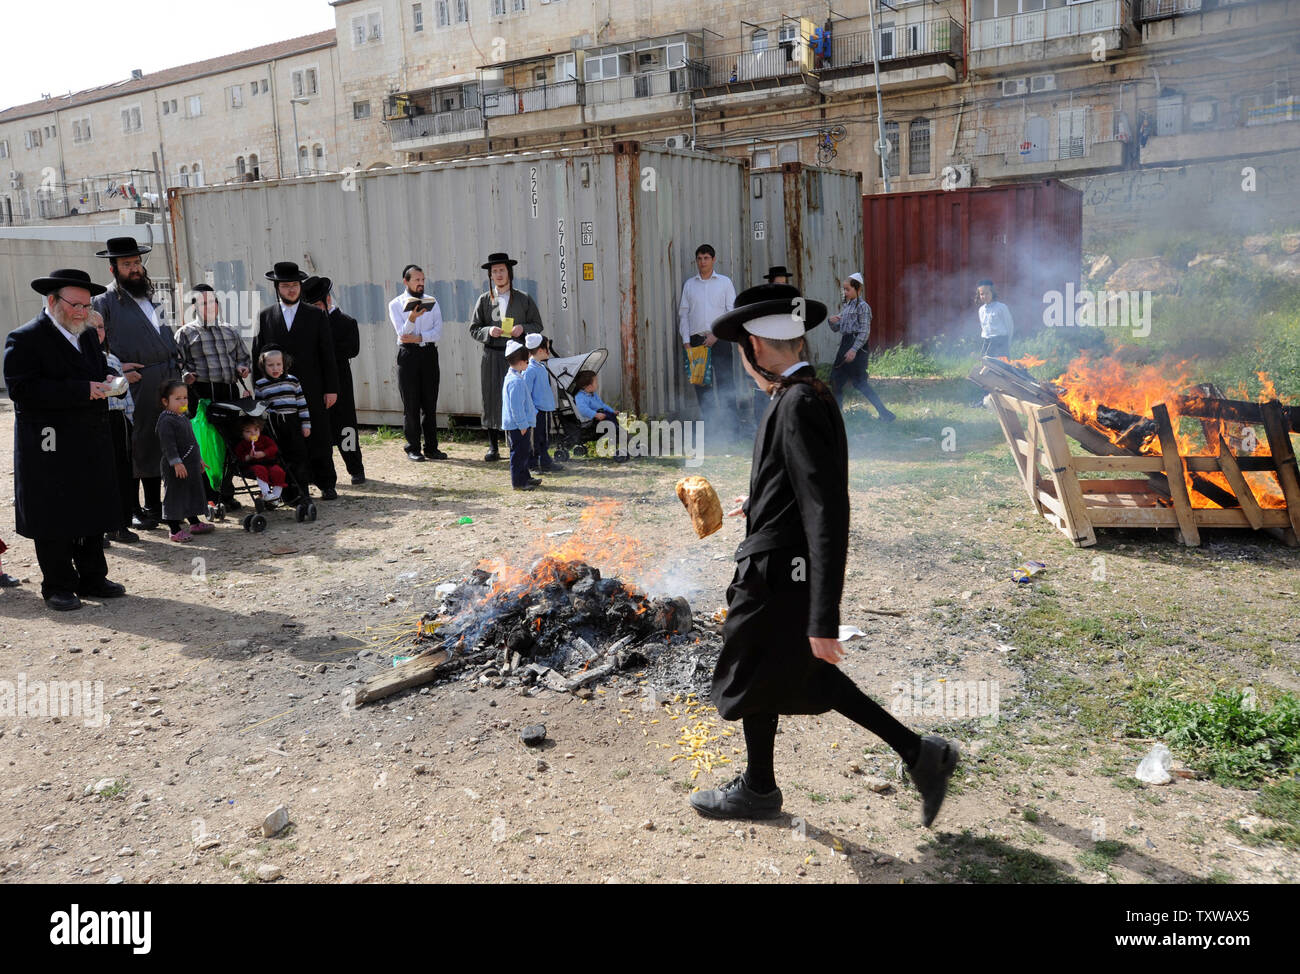 An Ultra-Orthodox Jewish boy throws a loaf of bread into a fire to burn leavened products before the start at sundown of the Passover festival in the religious neighborhood of Mea Shearim in Jerusalem, April 18, 2011. The Passover holiday commemorates the story of the ancient Israelites exodus from Egypt.  All leavened food is forbidden during the week-long holiday.  UPI/Debbie Hill Stock Photo